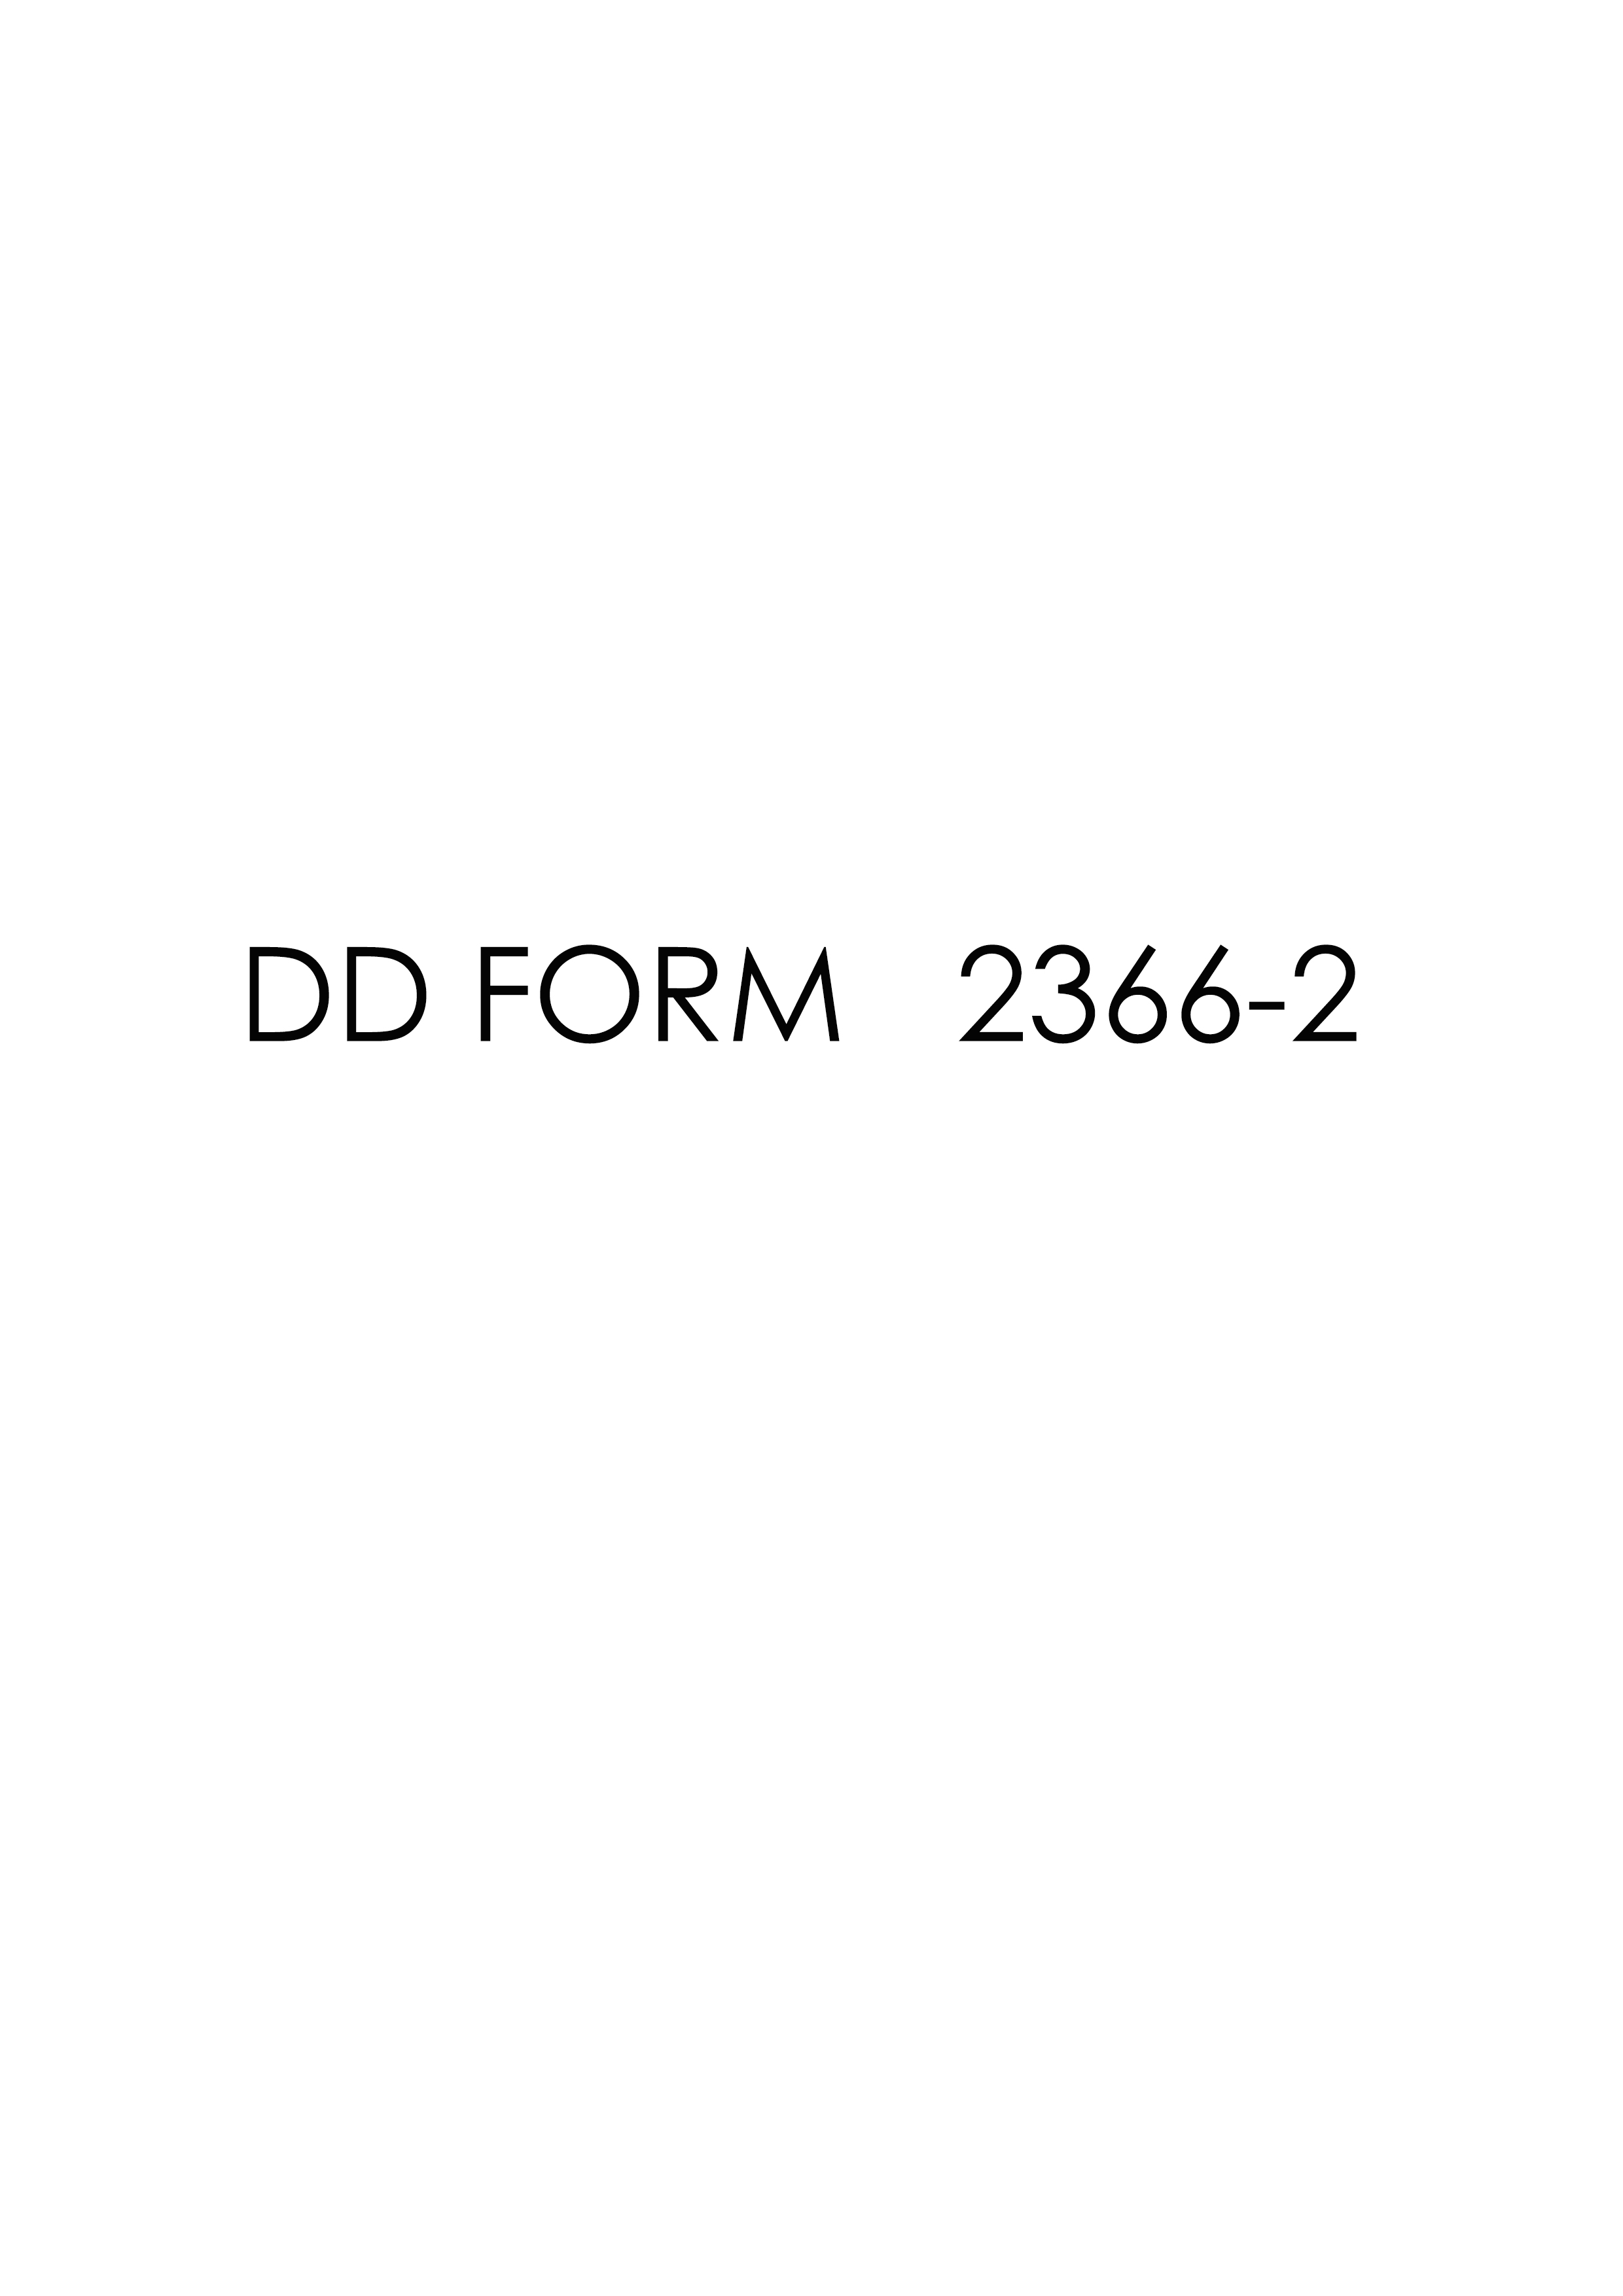 Download Fillable dd Form 2366-2